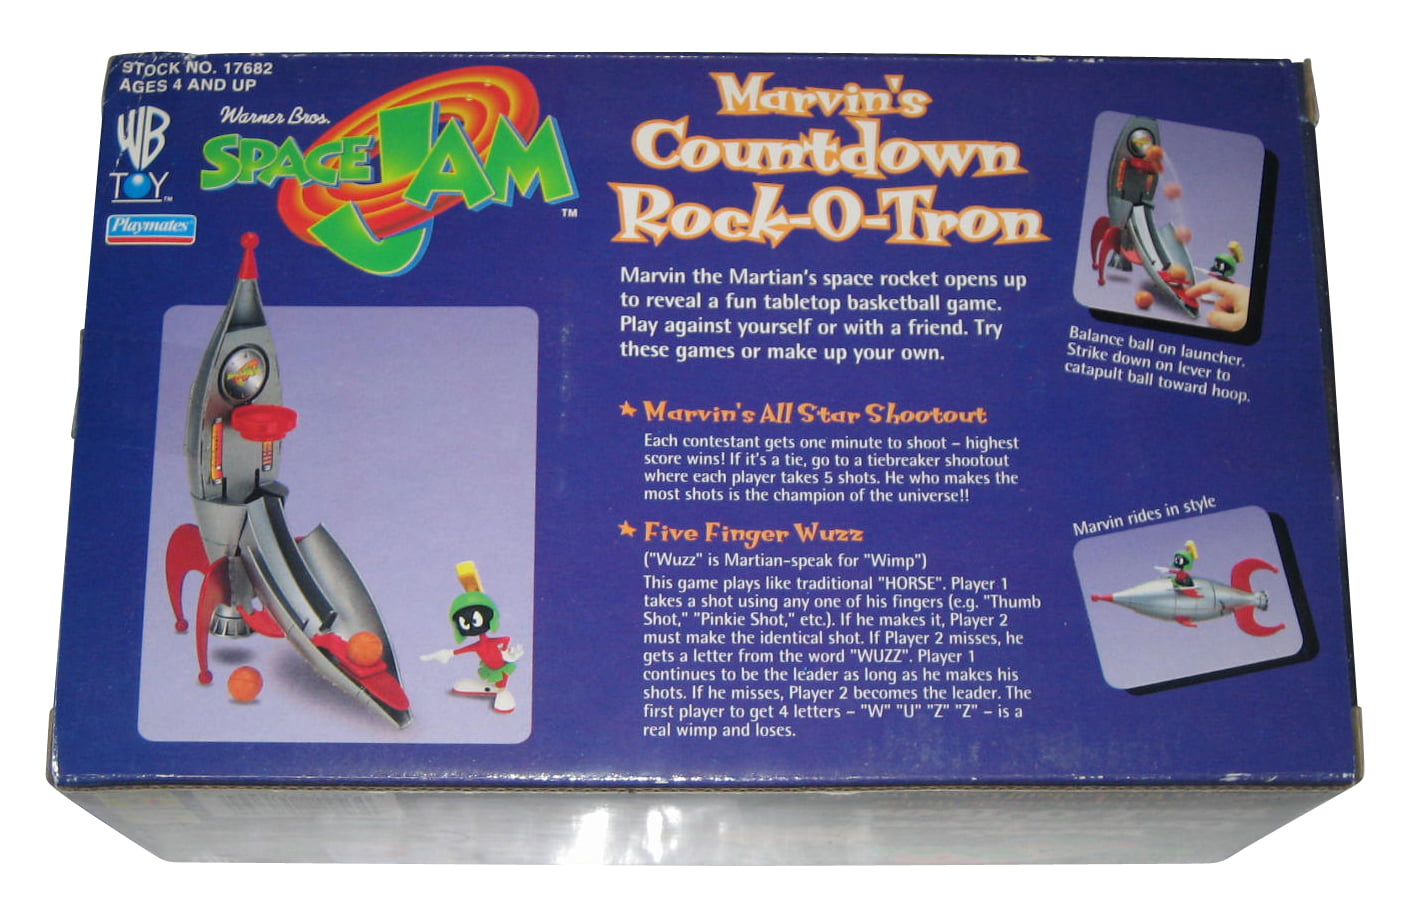 Space Jam Marvin's Countdown Rock-o-tron 1996 Playmates Toys for sale online 